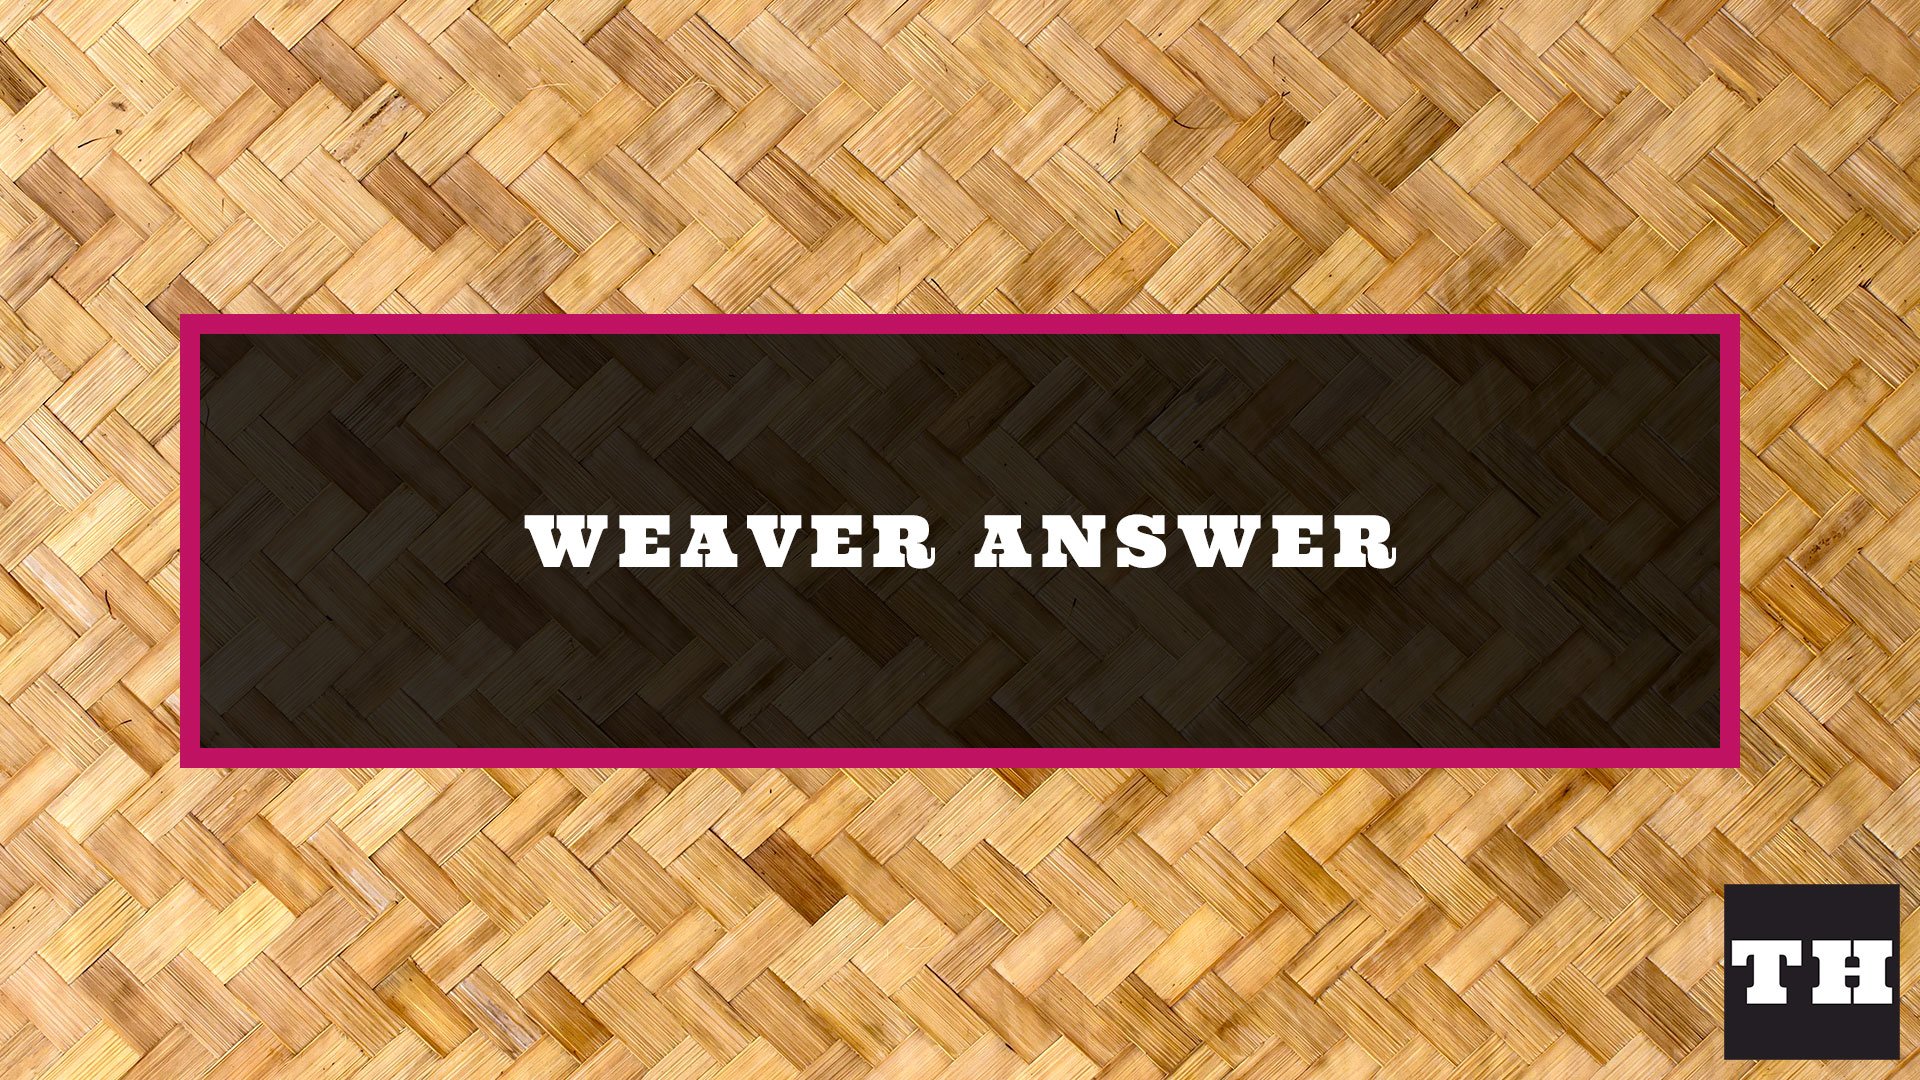 Featured Weaver Answer Today